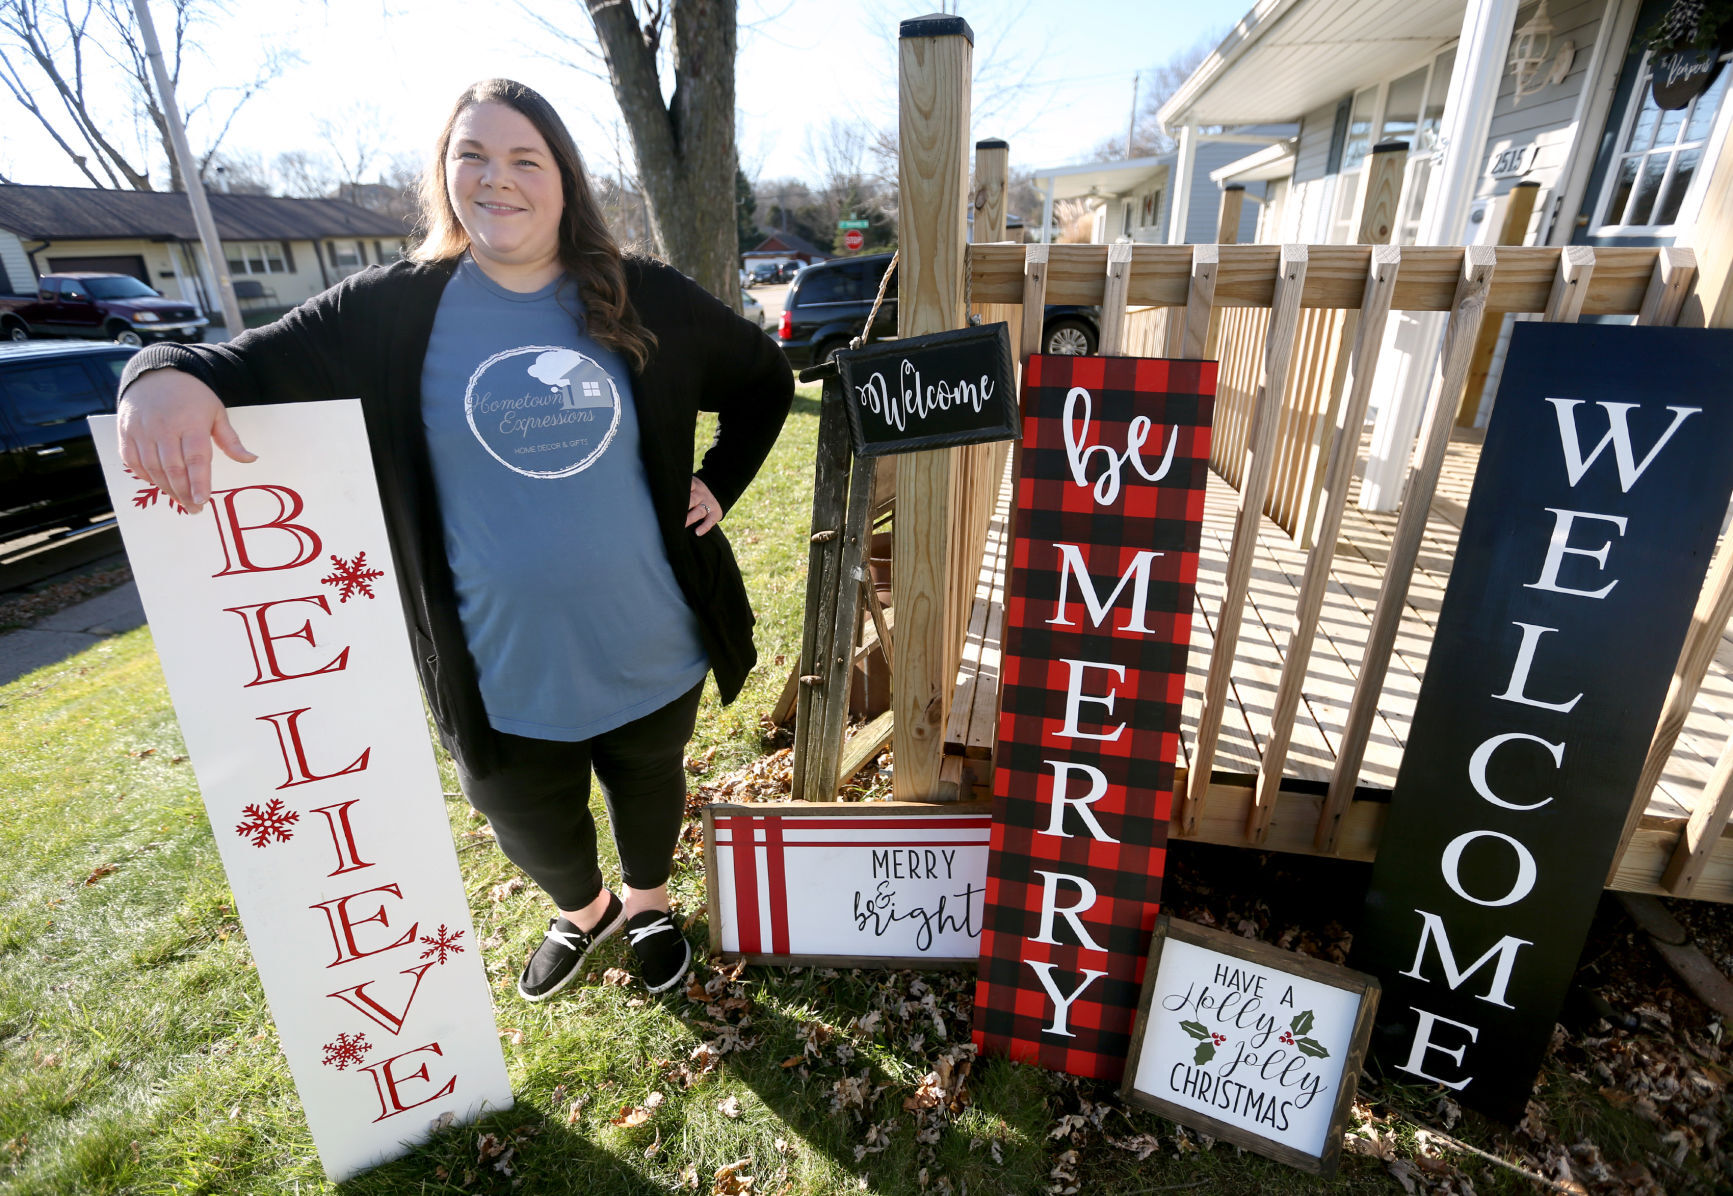 Amy Kempen, owner of Hometown Expressions, shows off some designs outside her home in Dubuque on Friday, Nov. 27, 2020. PHOTO CREDIT: JESSICA REILLY